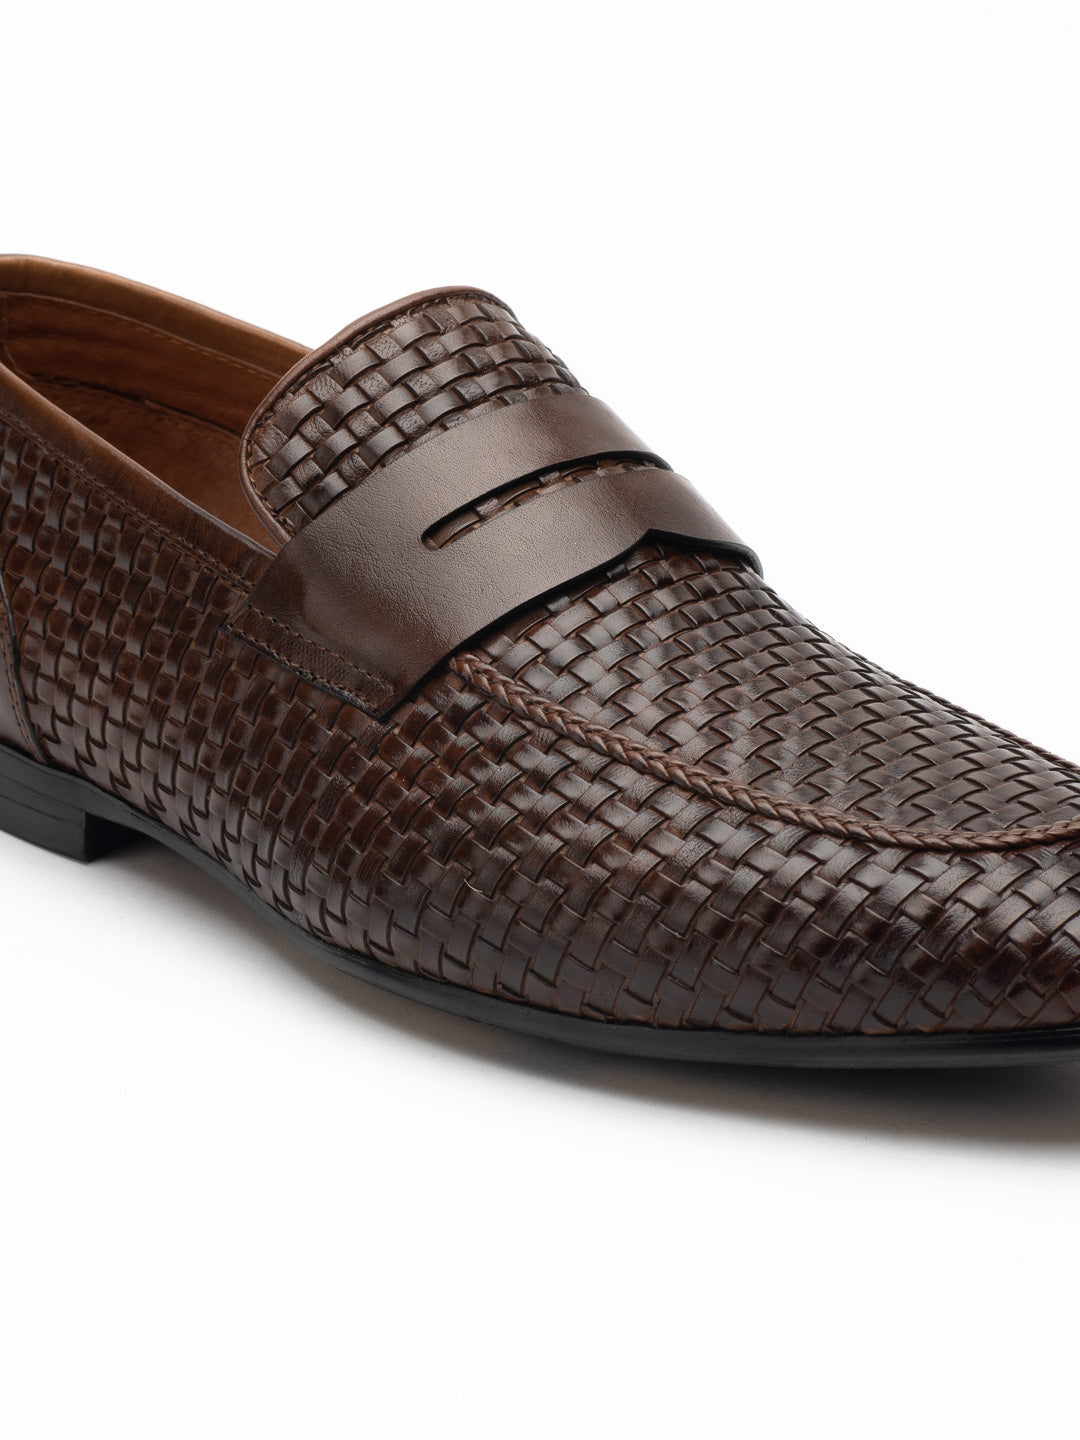 Textured Dark Brown Penny Loafers